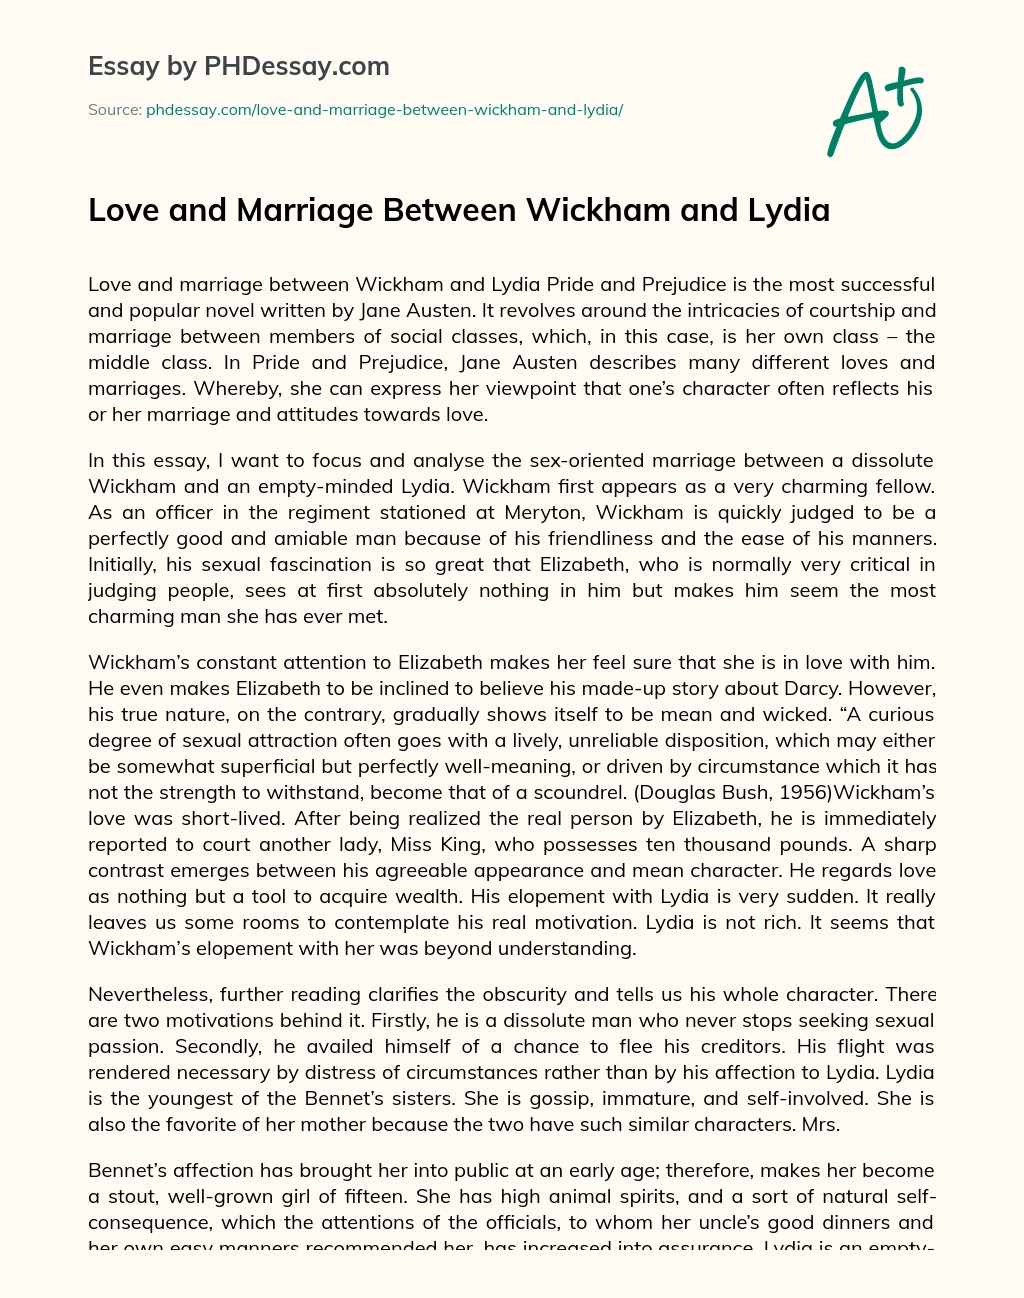 Love and Marriage Between Wickham and Lydia essay